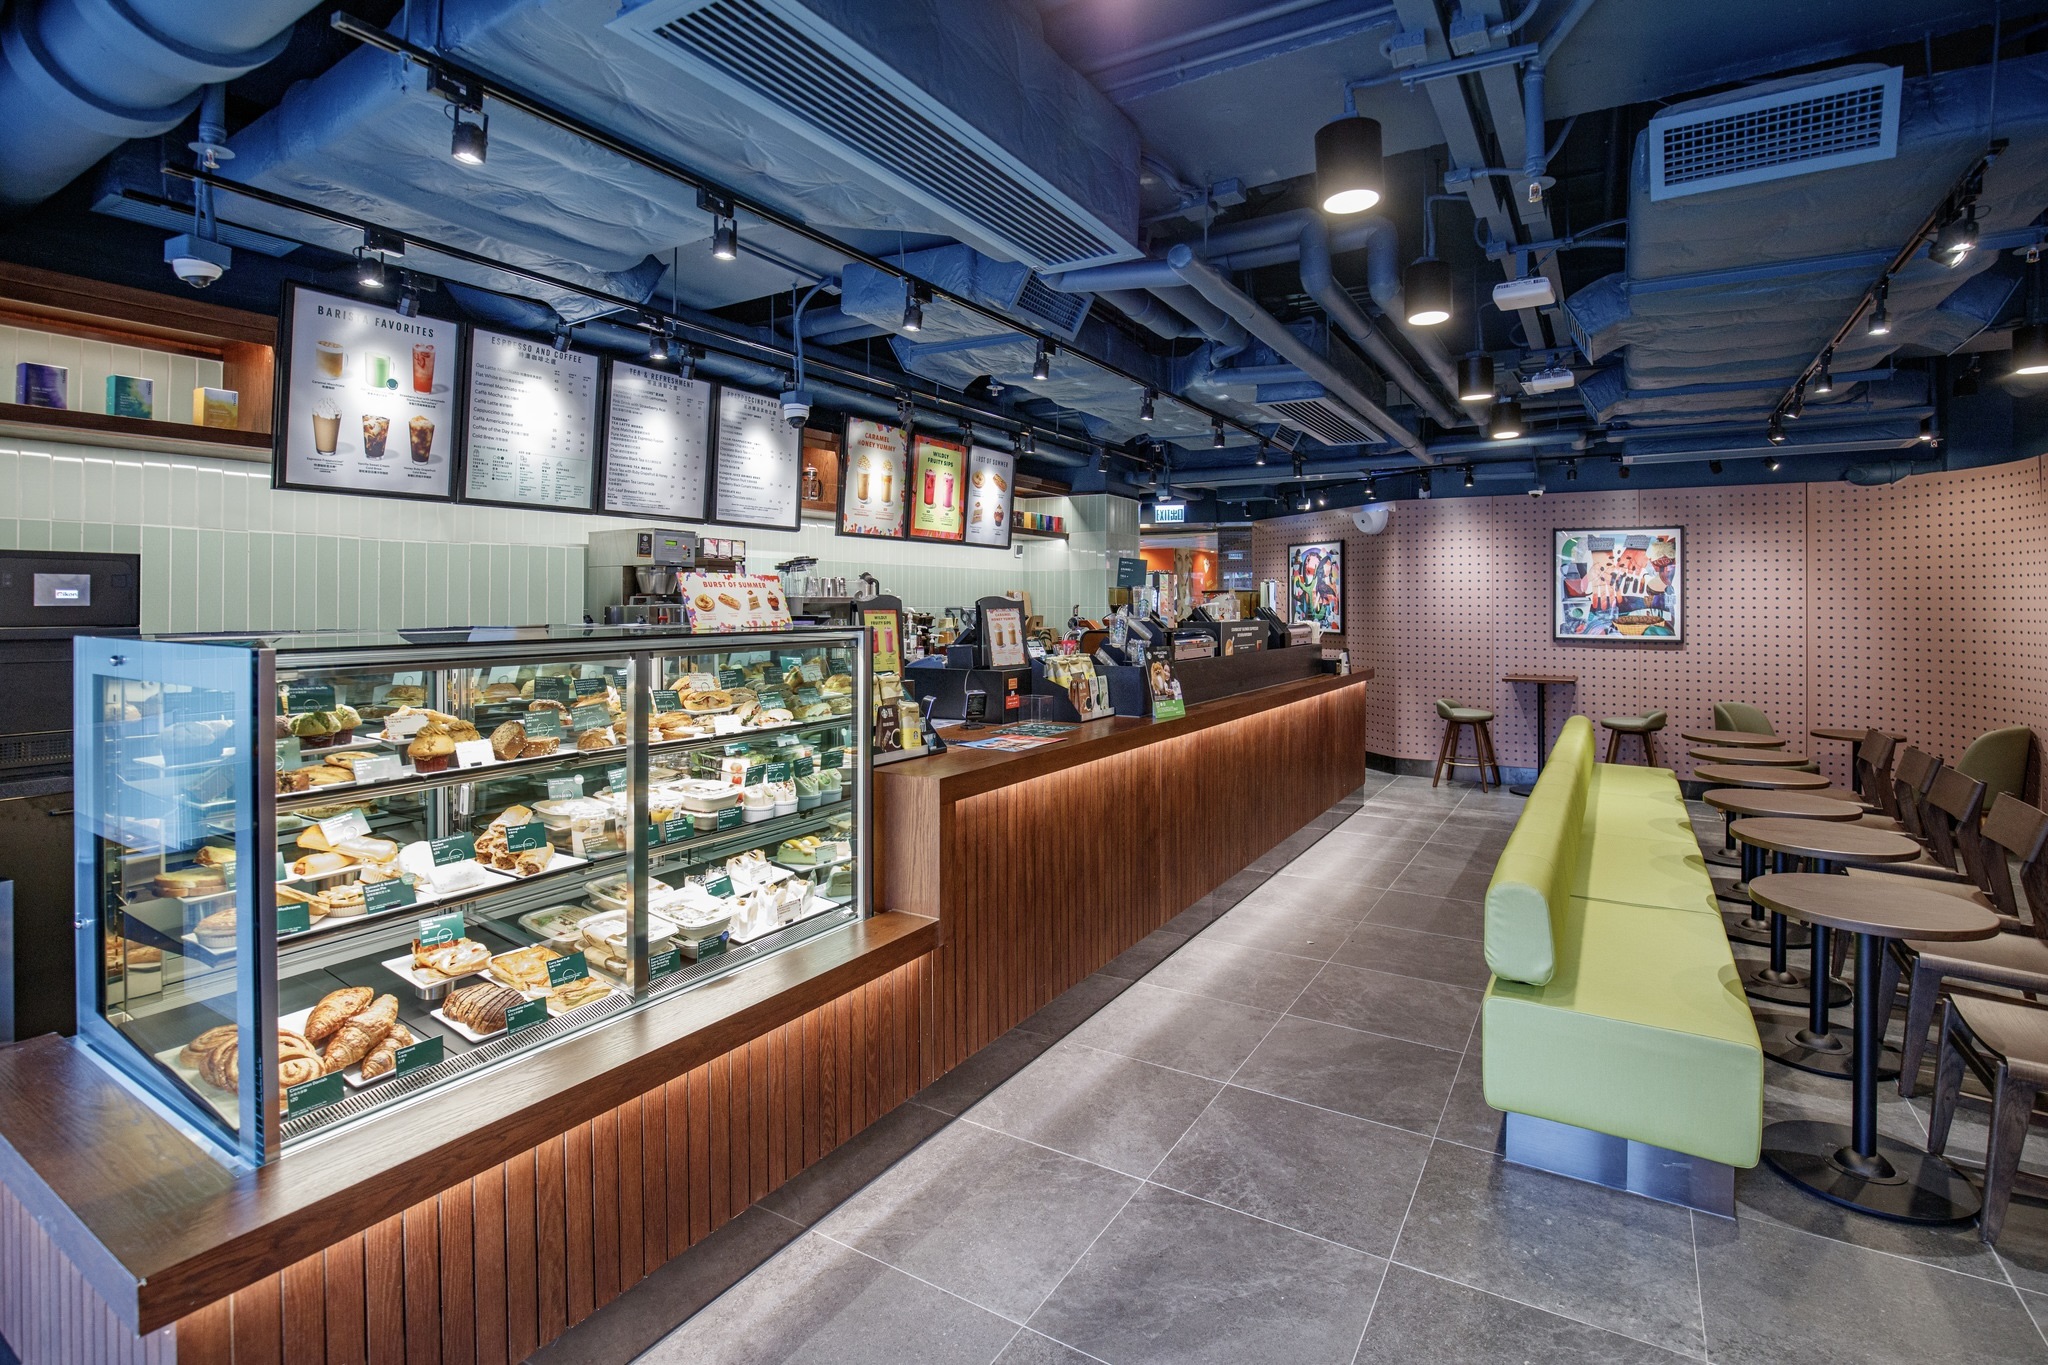 The new pet-friendly Starbucks at Cheung Sha Wan has lots of space for pets and owners to move around and convenient low seating.